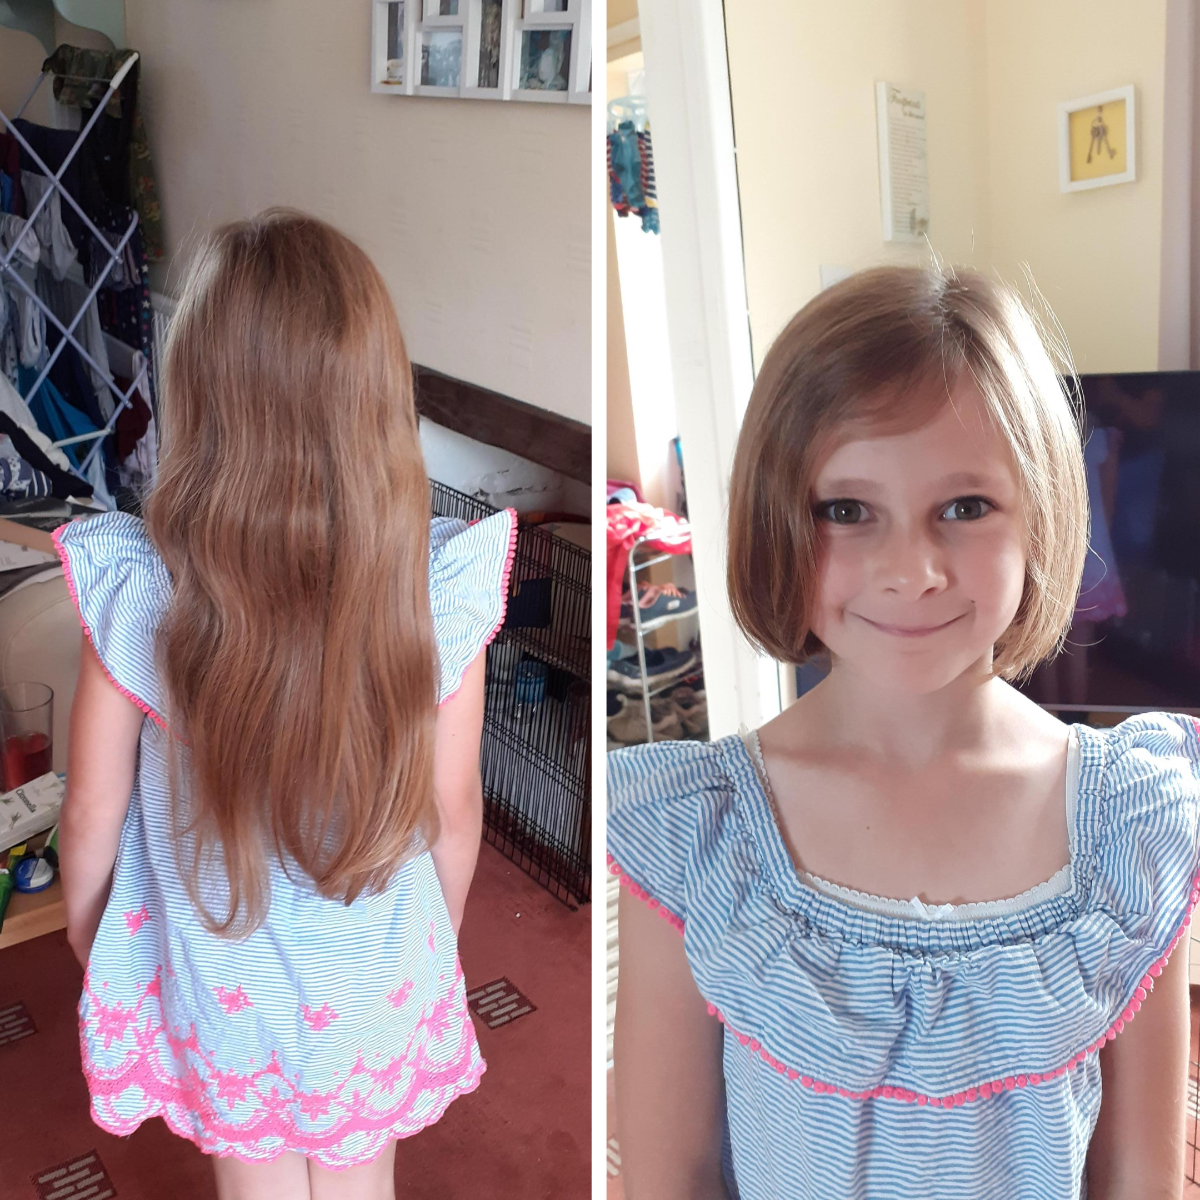 Side-by-side images of little girl with long hair and then shorter hair